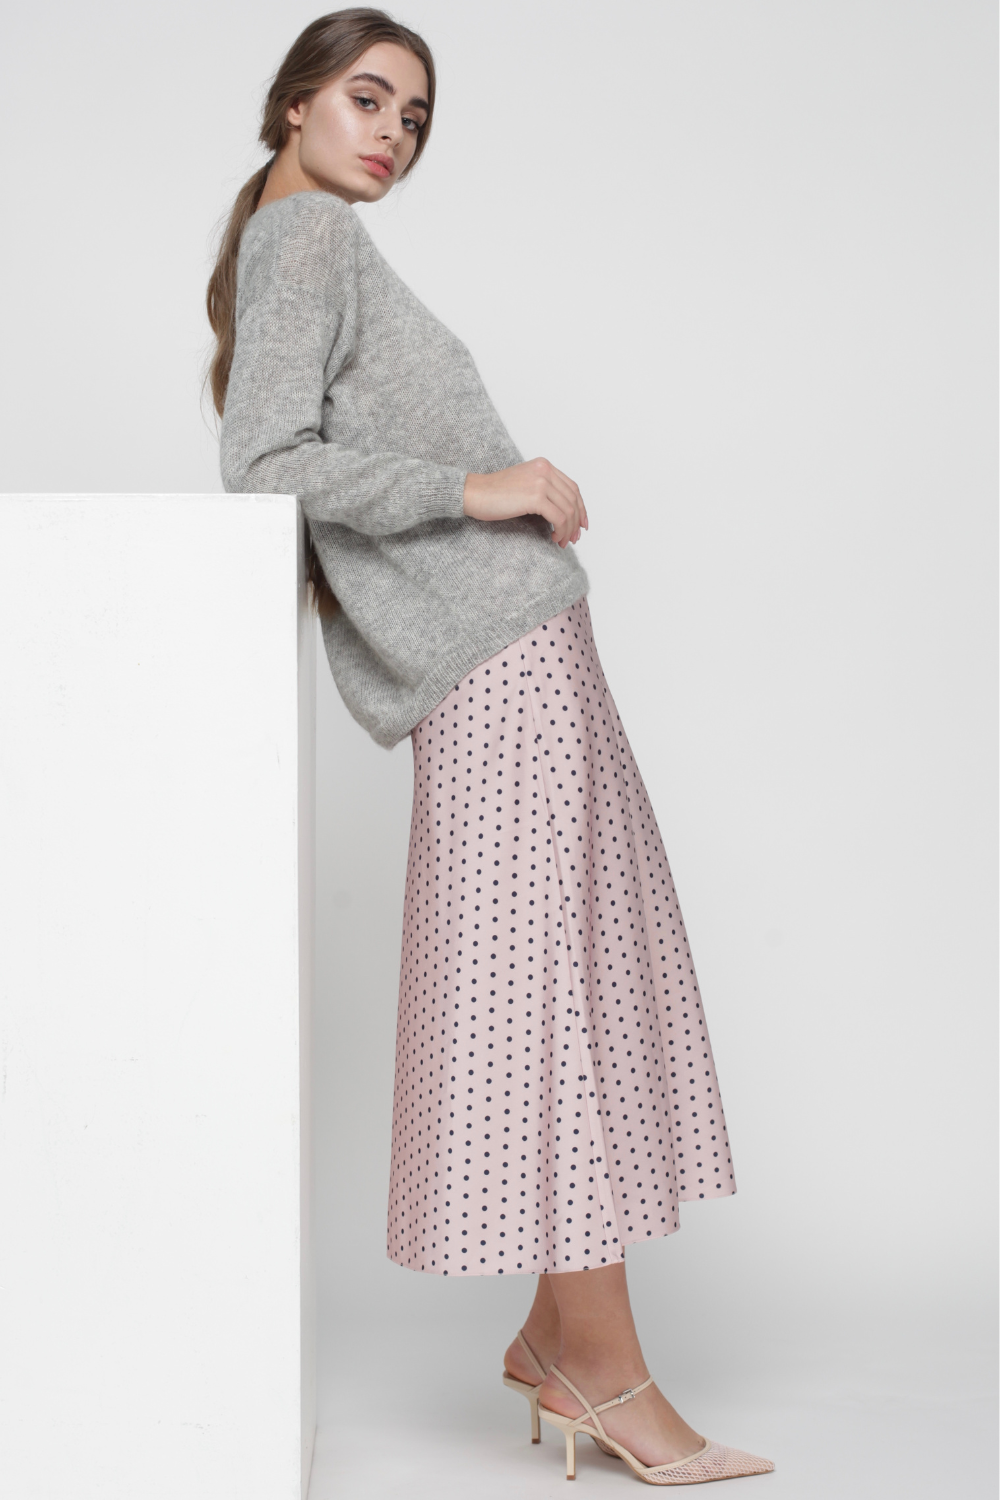 Silk skirt with polka dots on a rubber band (Miss Secret) SK-005-pink